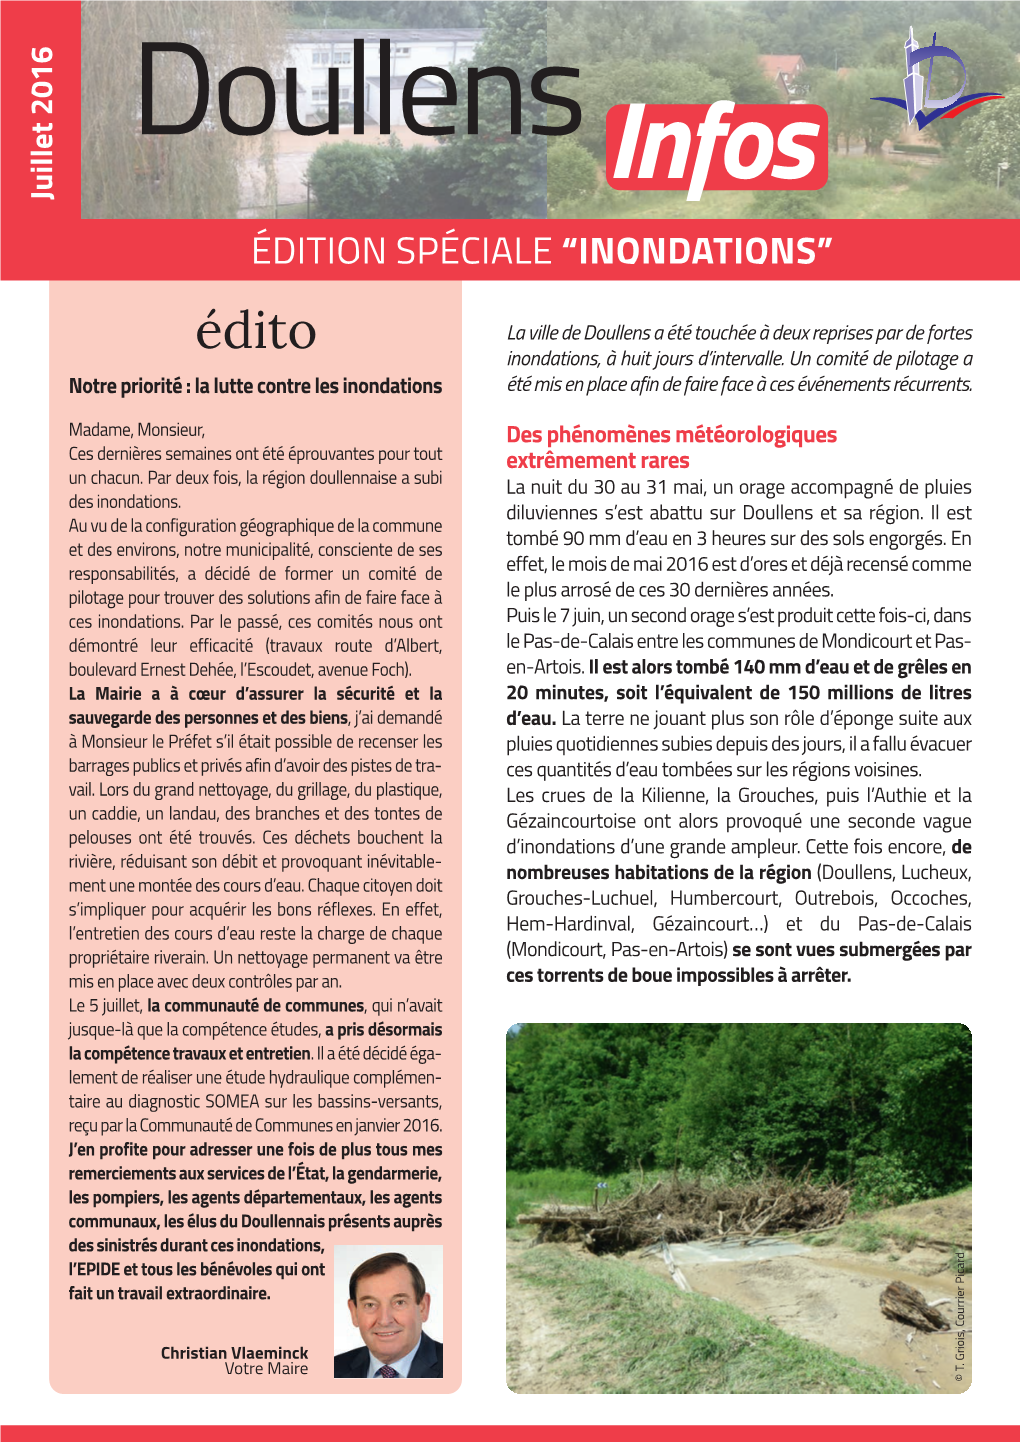 Inondations V 20/07/2016 11:41 Page1 Doullens Juillet 2016 Infos Édition SPÉCIALE “Inondations”